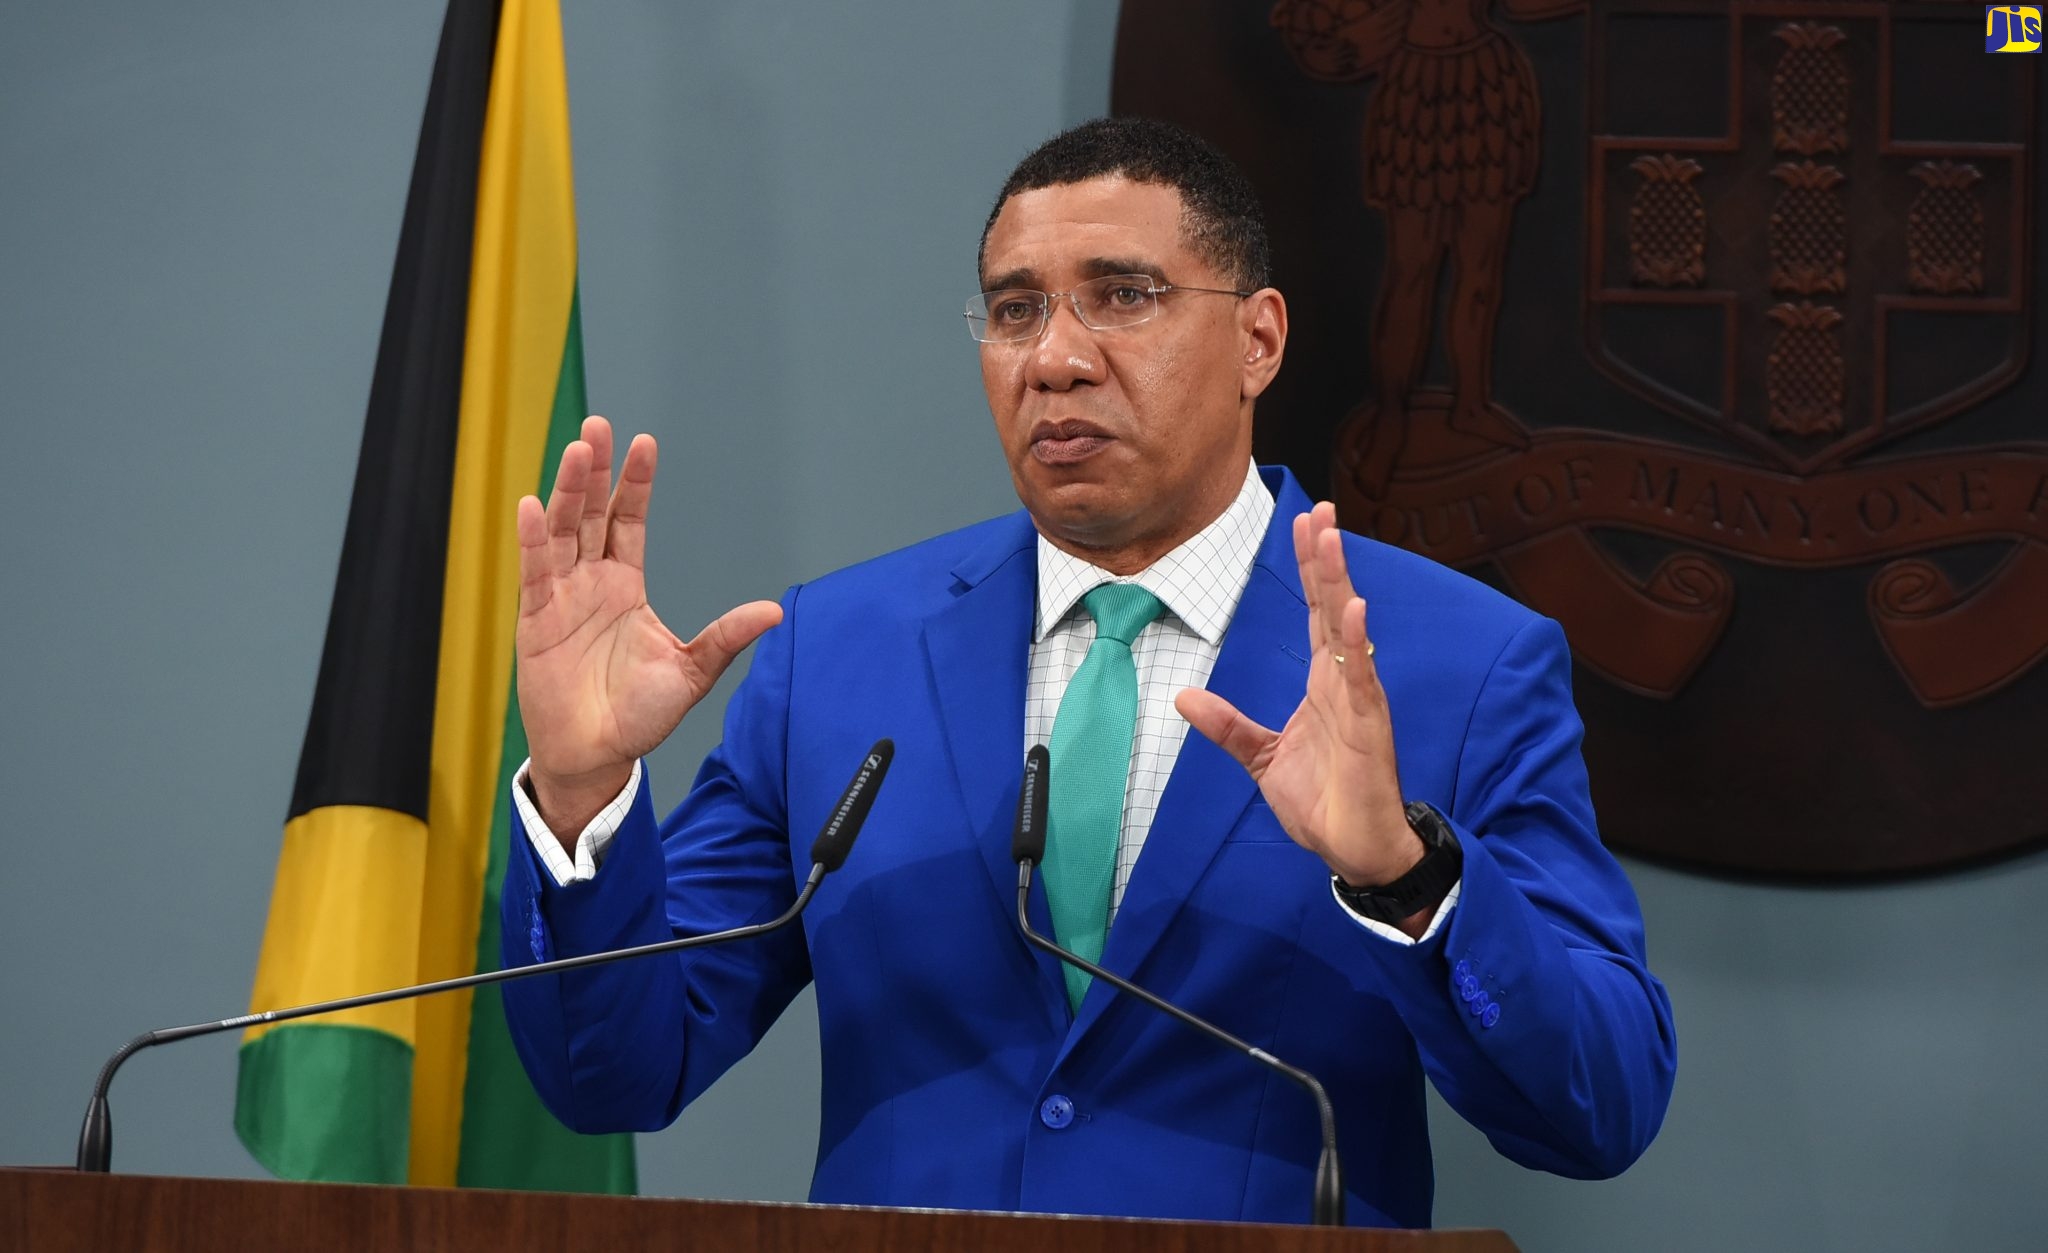 Jamaica’s PM tell citizens “No need to panic over COVID numbers”